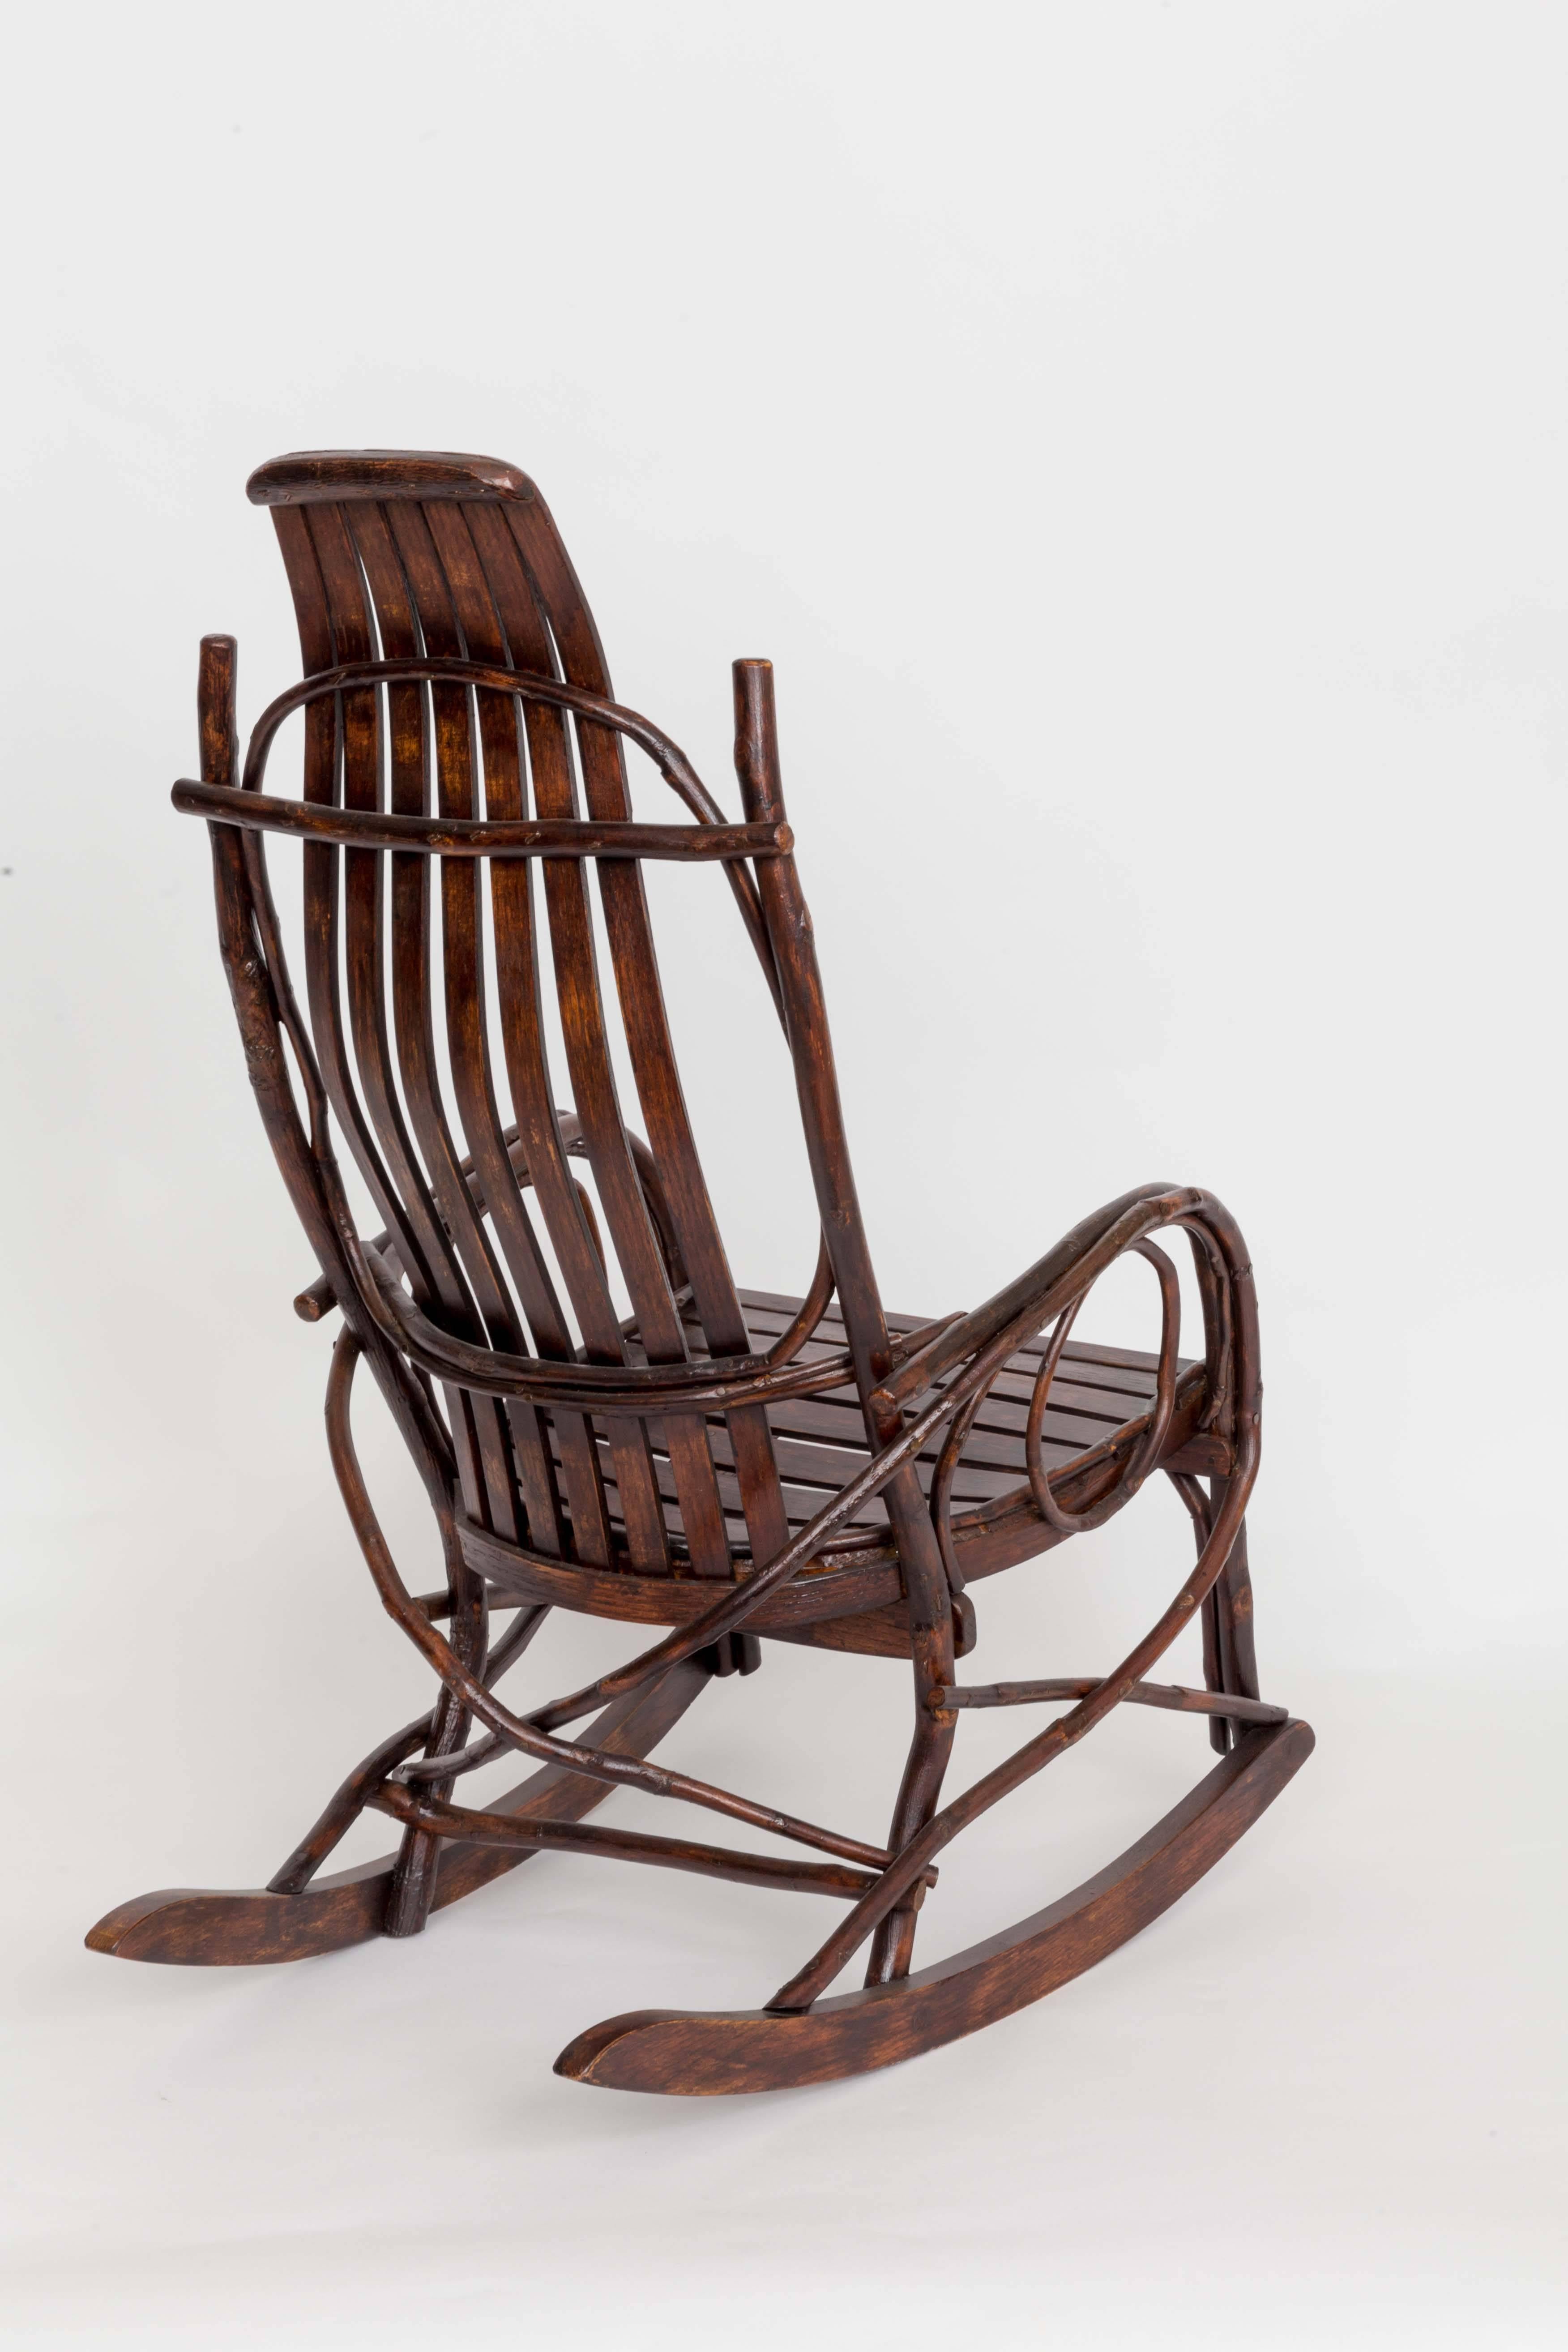 Hand-Crafted Early 20th-Century Adirondack Childs Rocker For Sale